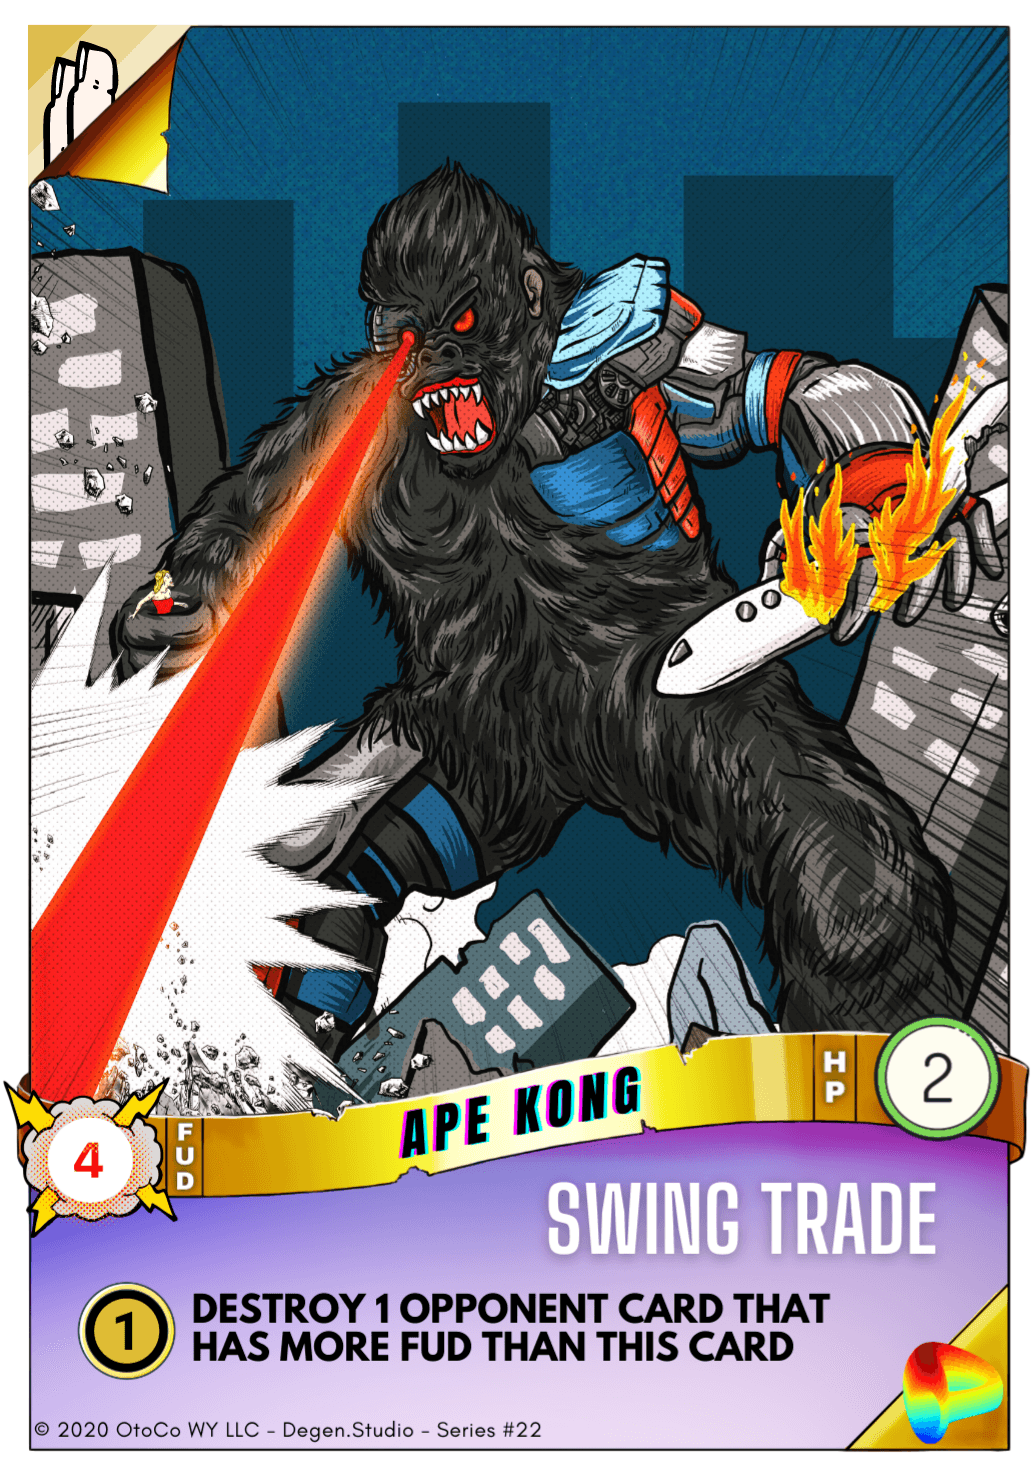 /DRM/ 1st Edition - Ape Kong [founders edition]